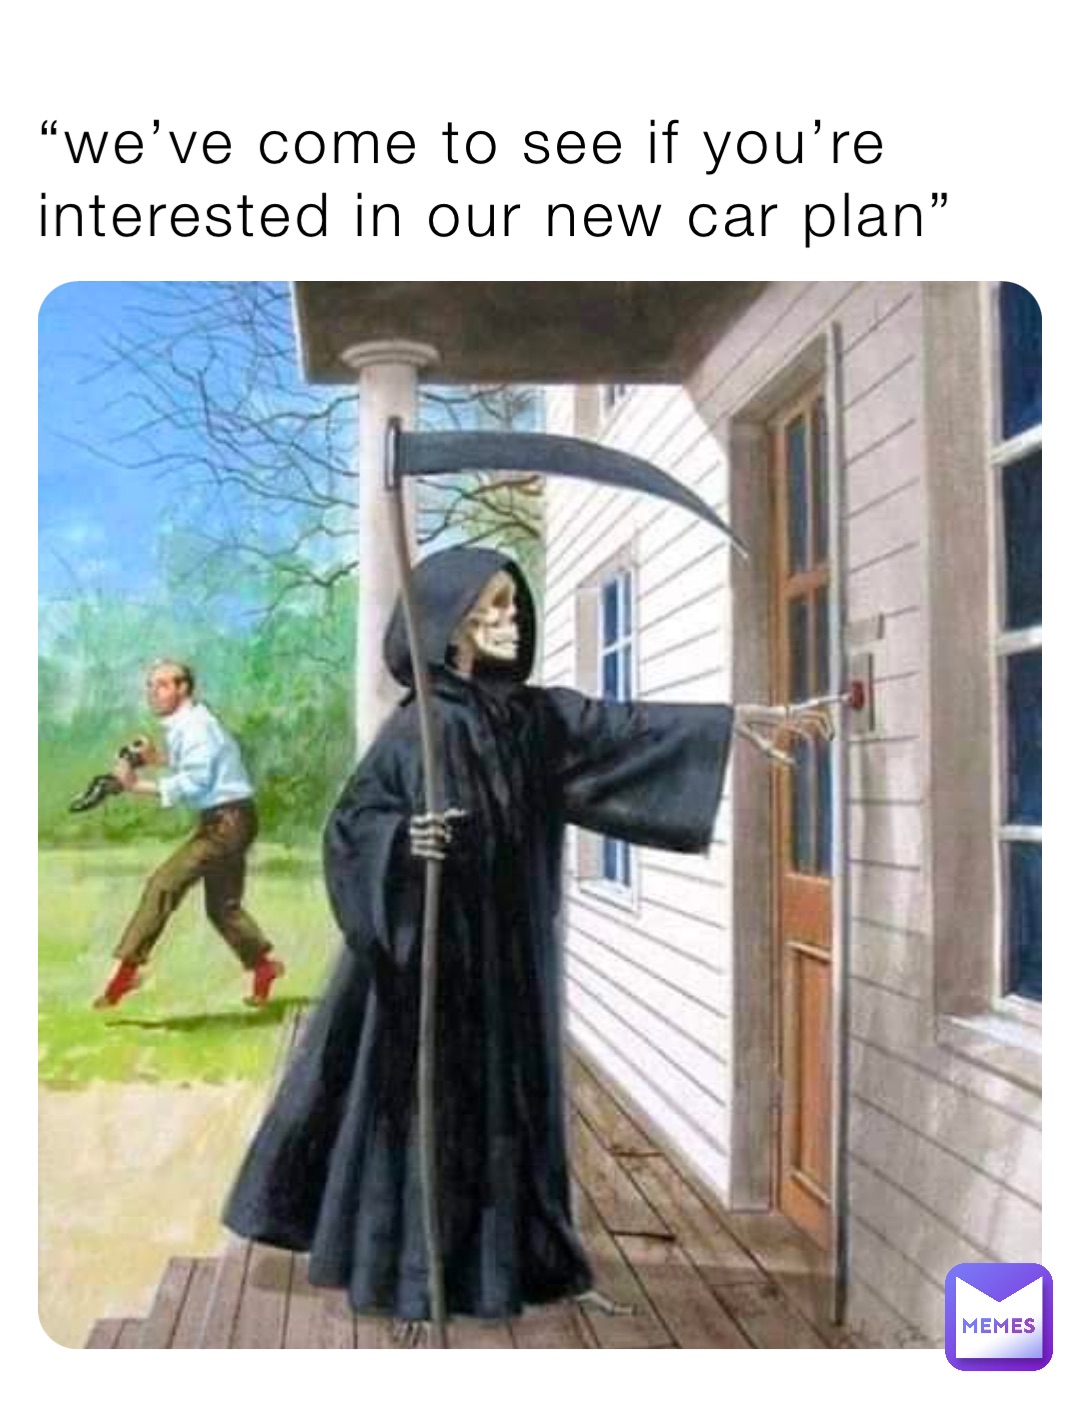 “we’ve come to see if you’re interested in our new car plan”